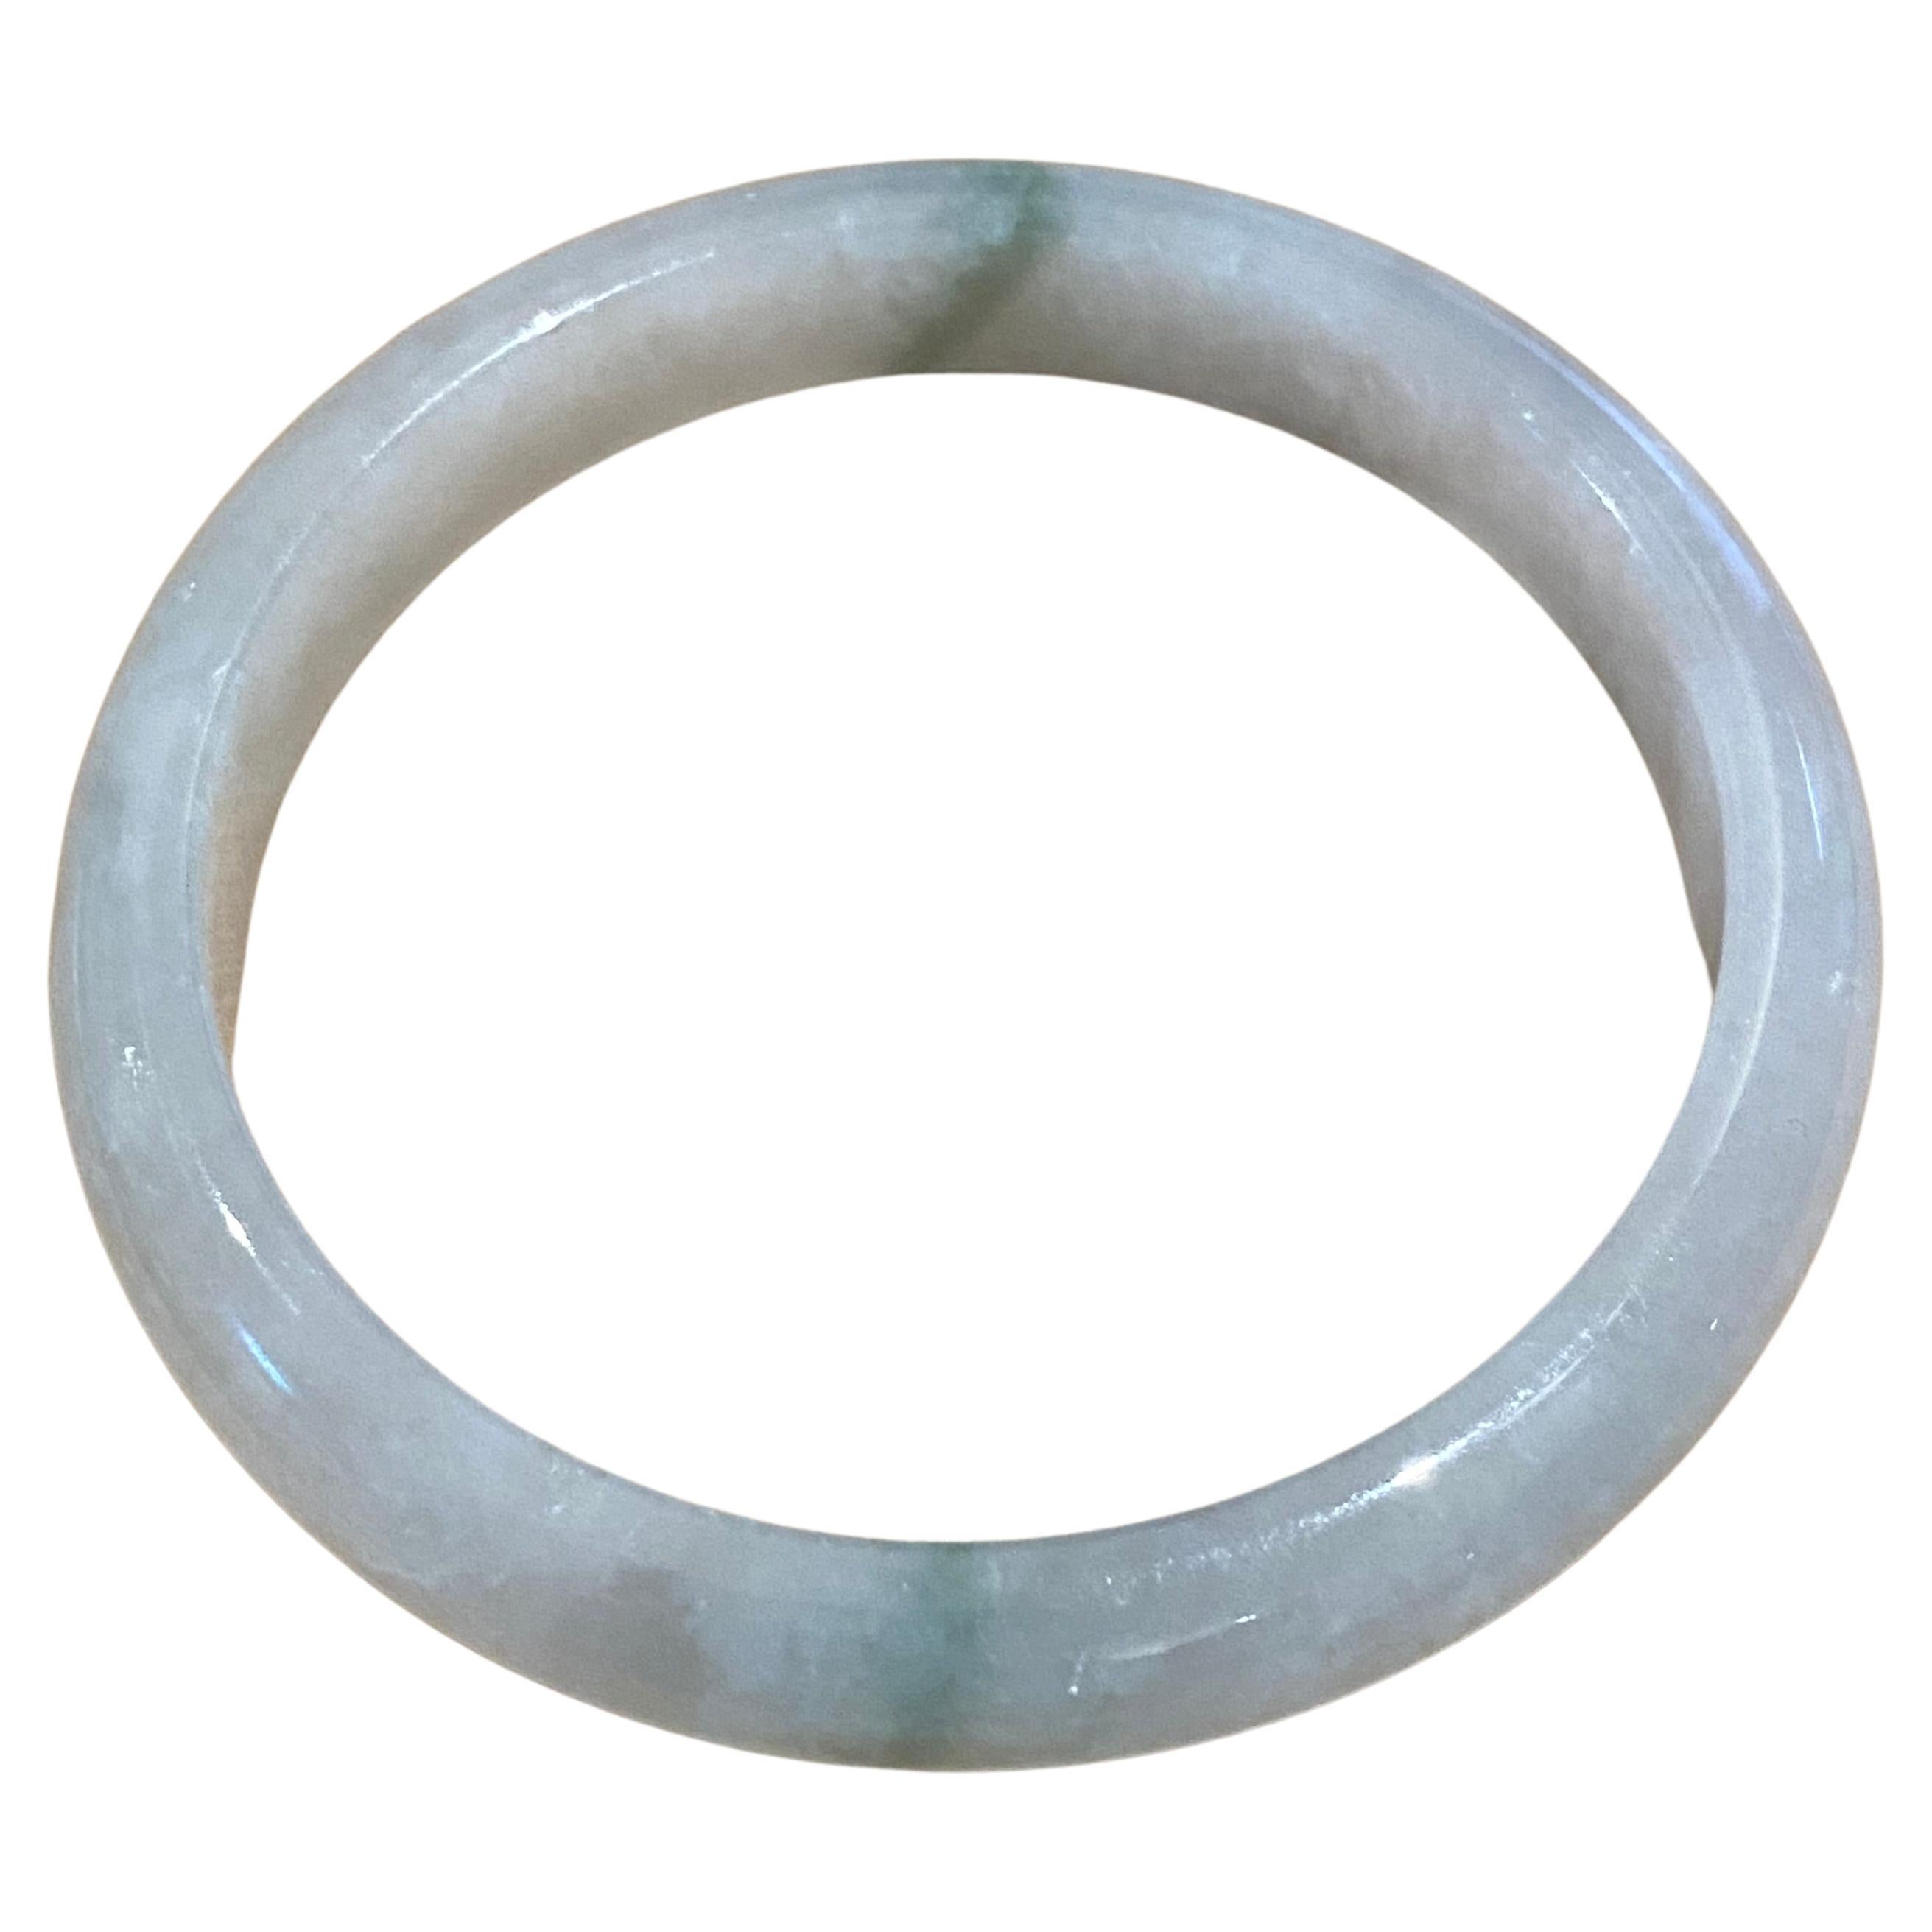 Type A Jadeite Bangle, of Greenish Grey colour, 37.1gr. 20cm, 58mm in diameter. For Sale